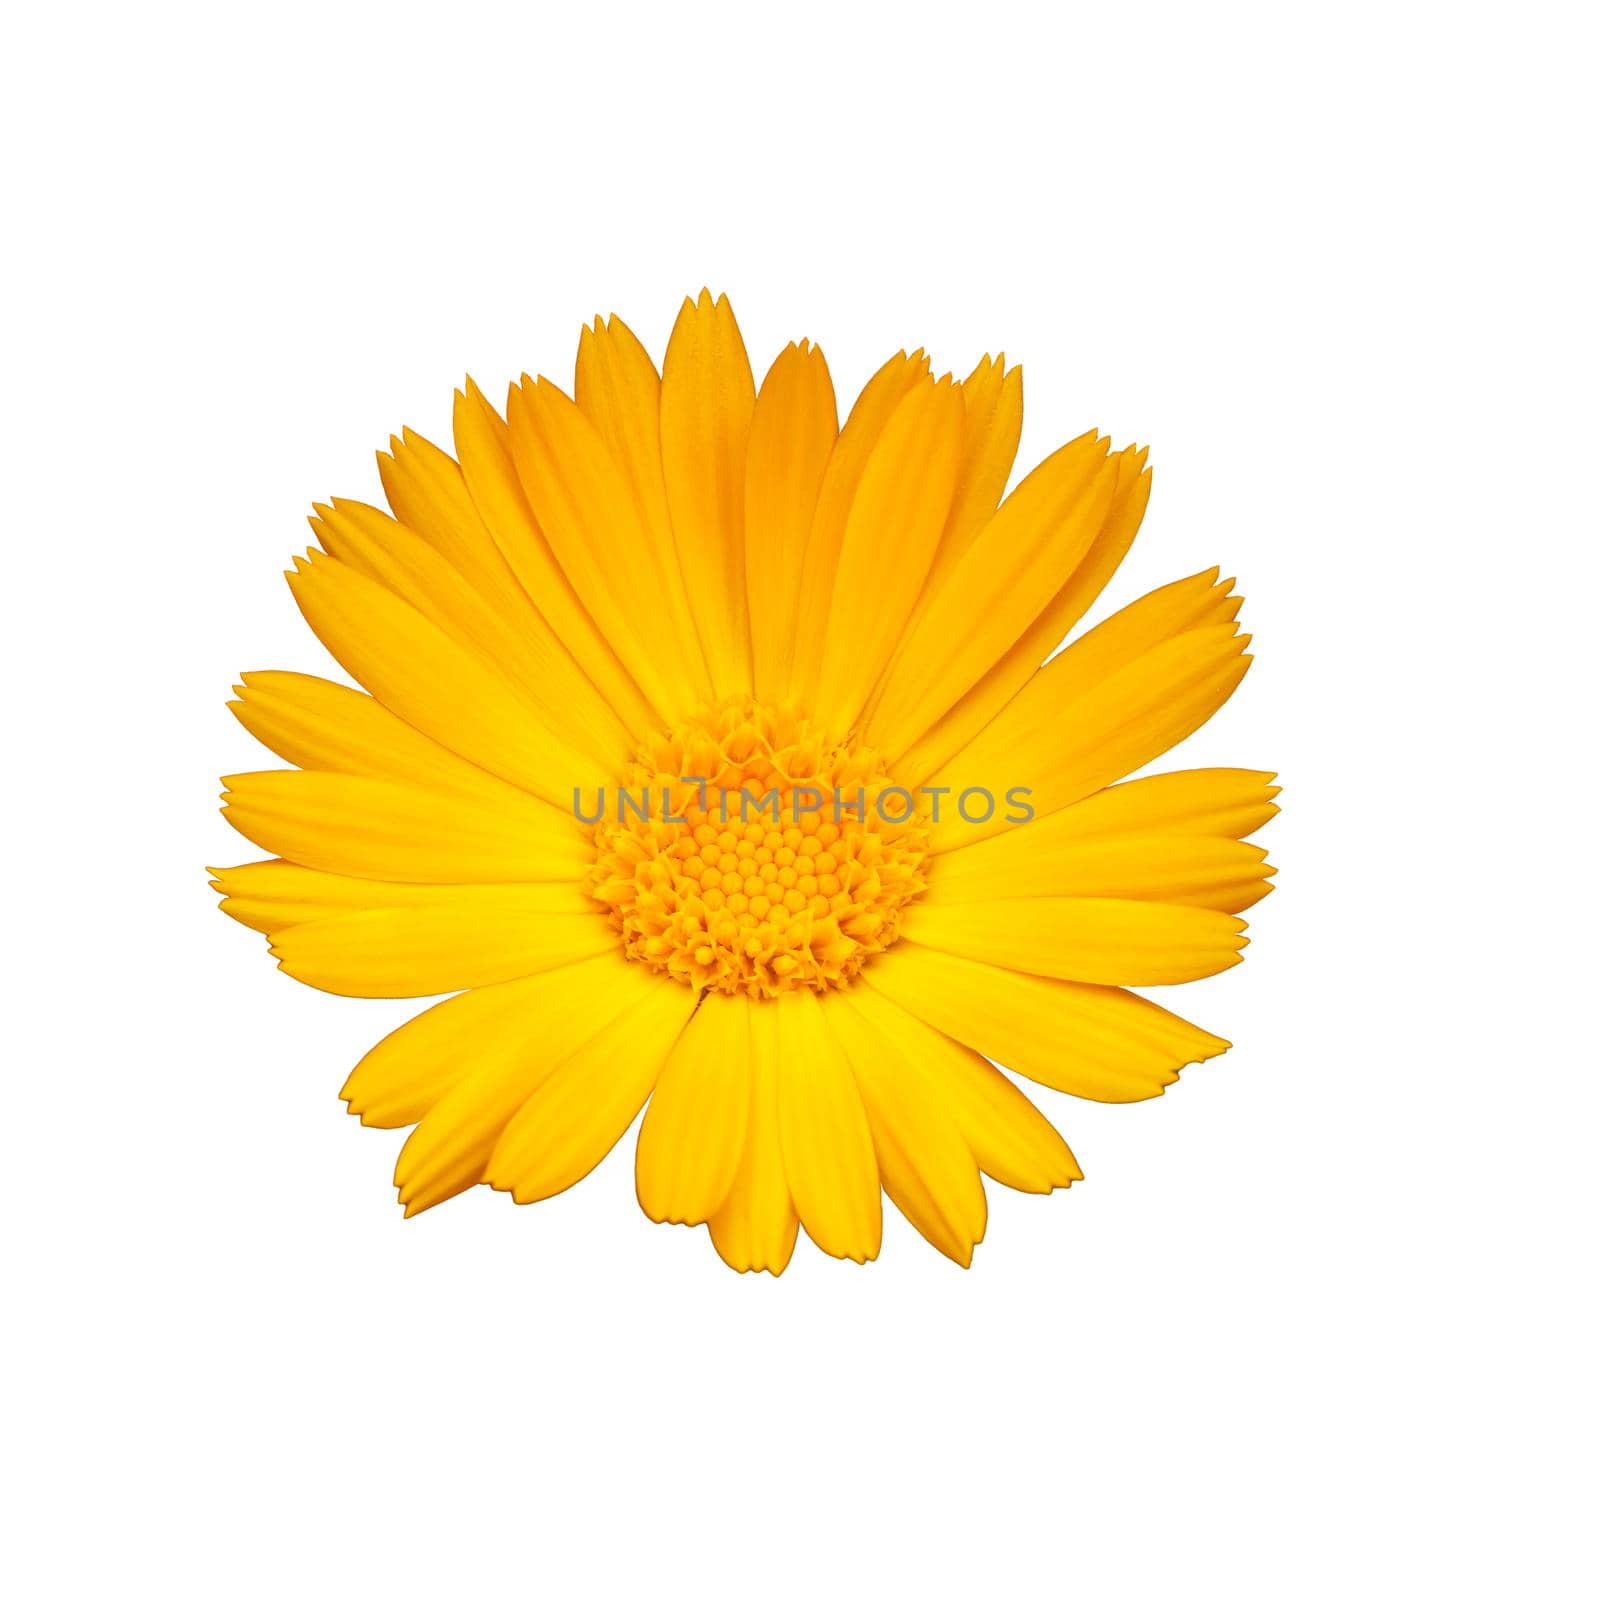 Close-up bud of a yellow marigold flower on the white isolated background. Blooming yellow calendula. Top view.